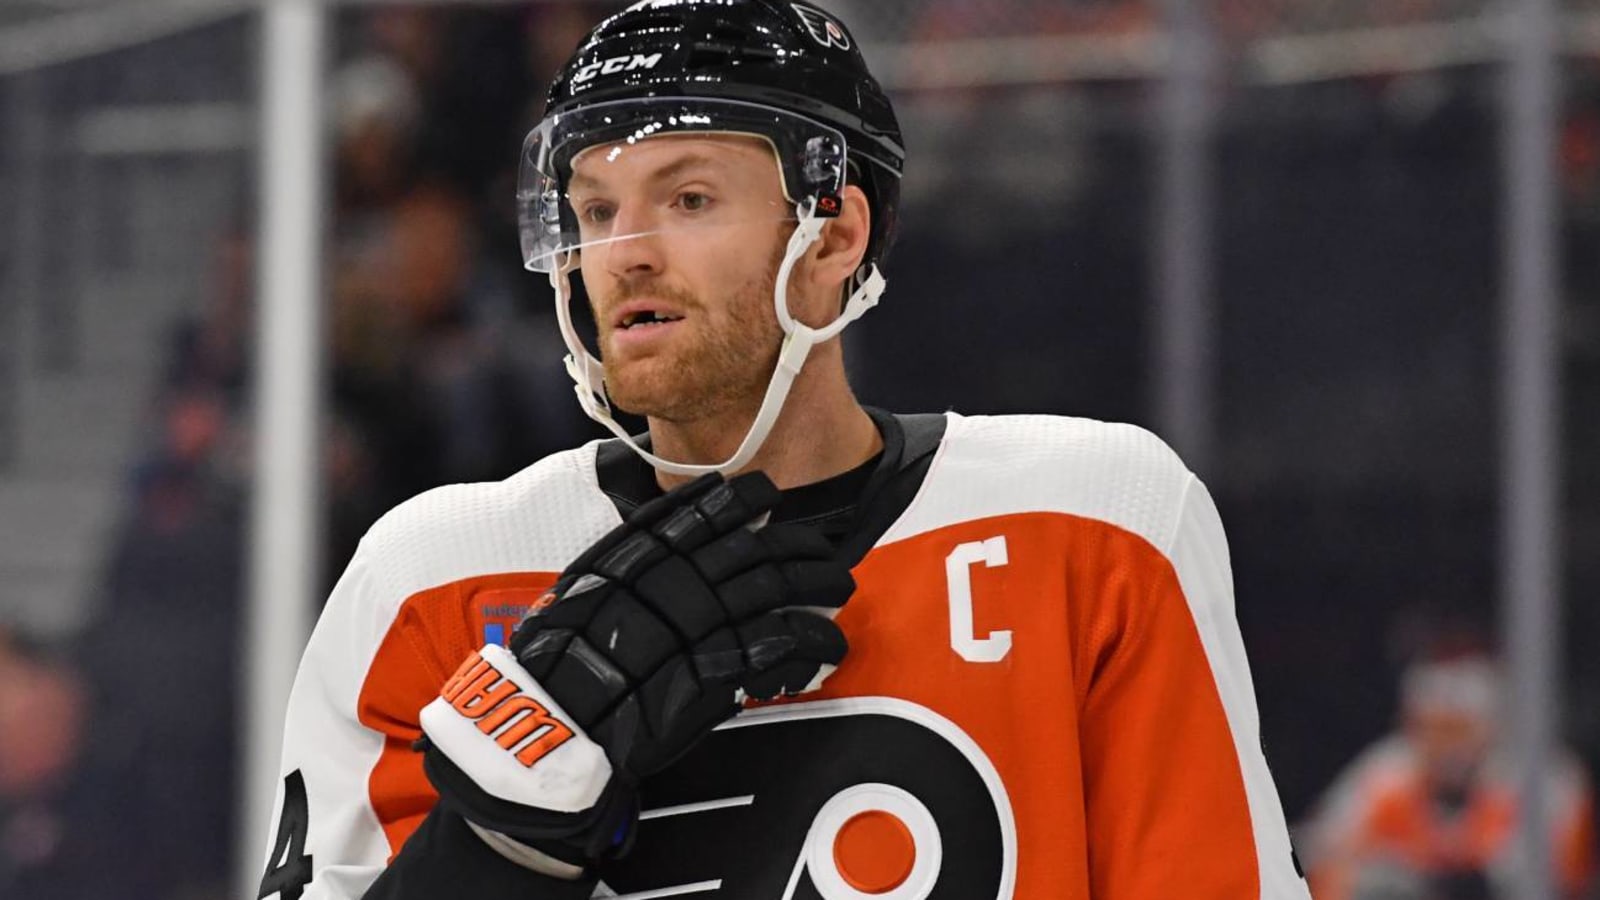 Philadelphia Flyers’ forward Sean Couturier out day-to-day with upper-body injury